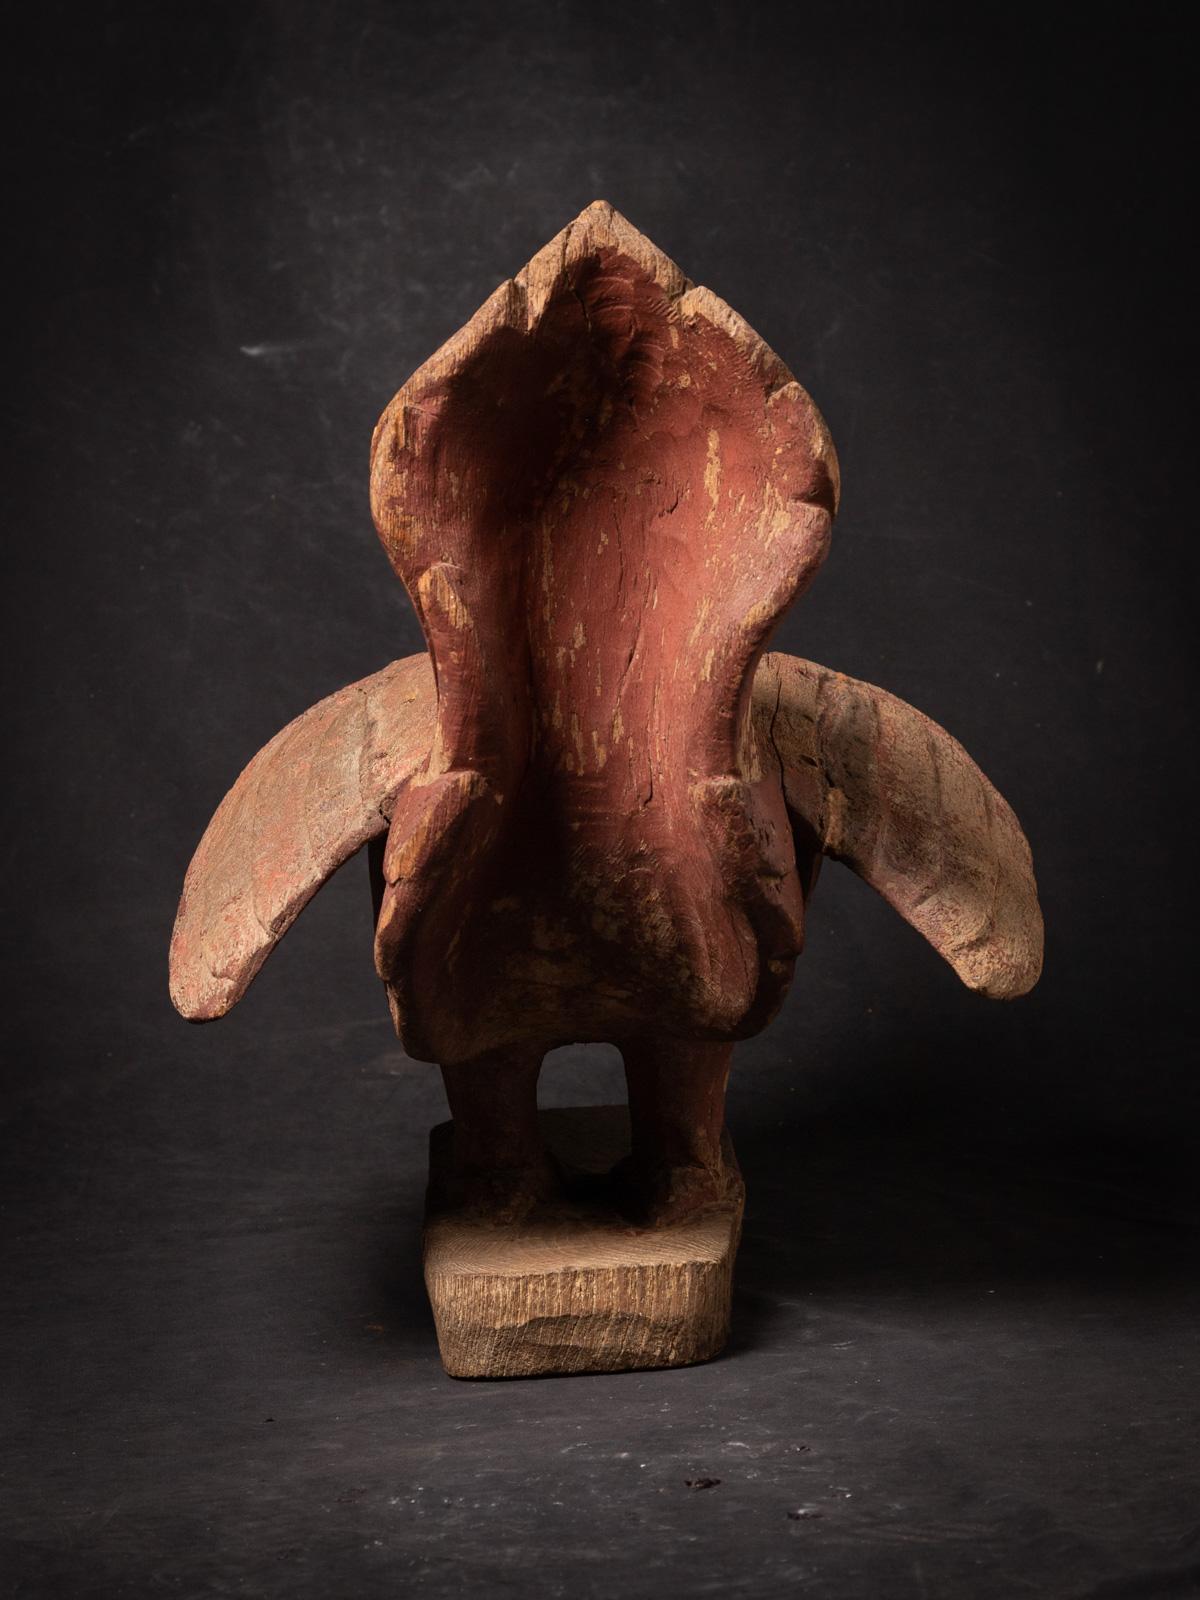 Material : wood
51,7 cm high
41 cm wide and 50,5 cm deep
The Mythological Hintha Bird is also being called : Hamsa bird
18th century
Weight: 14,15 kgs
Originating from Burma
Nr: 3666-40A